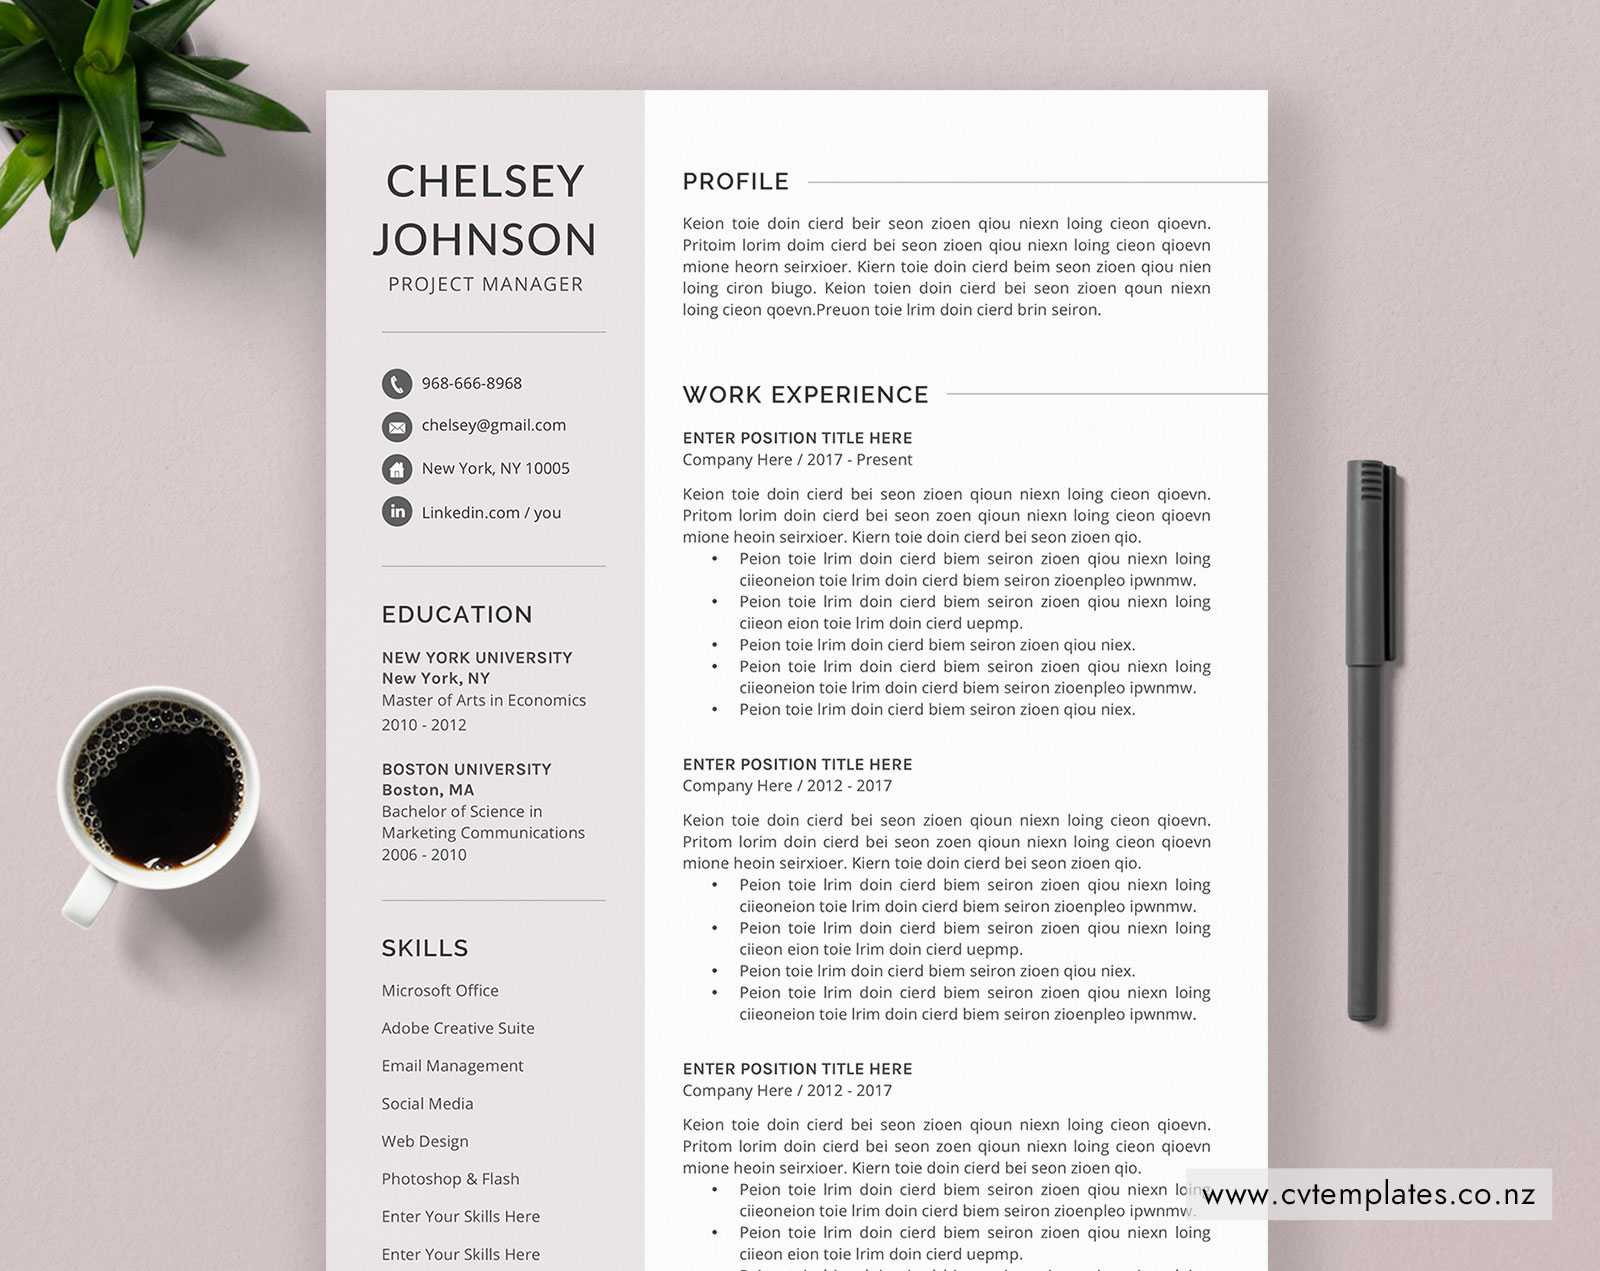 Cv Template, Professional Curriculum Vitae, Modern Cv Template, Ms Word,  Cover Letter, Creative Resume, Graduate Resume, Student Resume, Instant Pertaining To How To Make A Cv Template On Microsoft Word